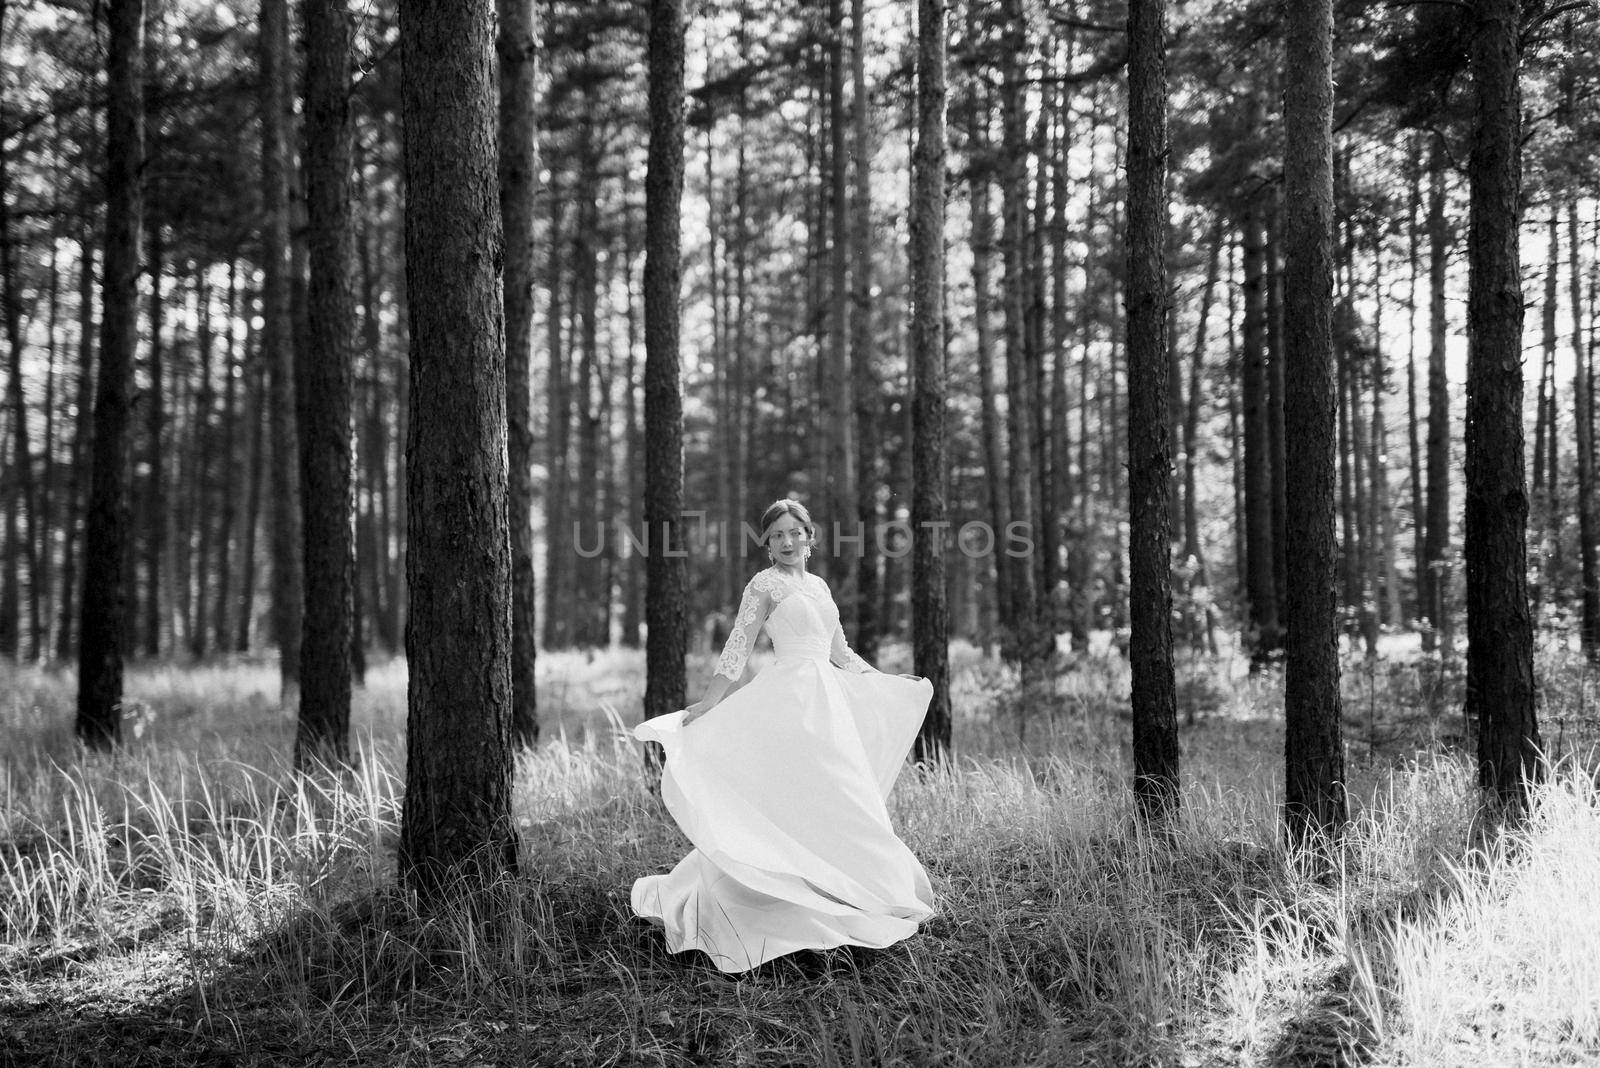 the bride walking in a pine forest on a bright day